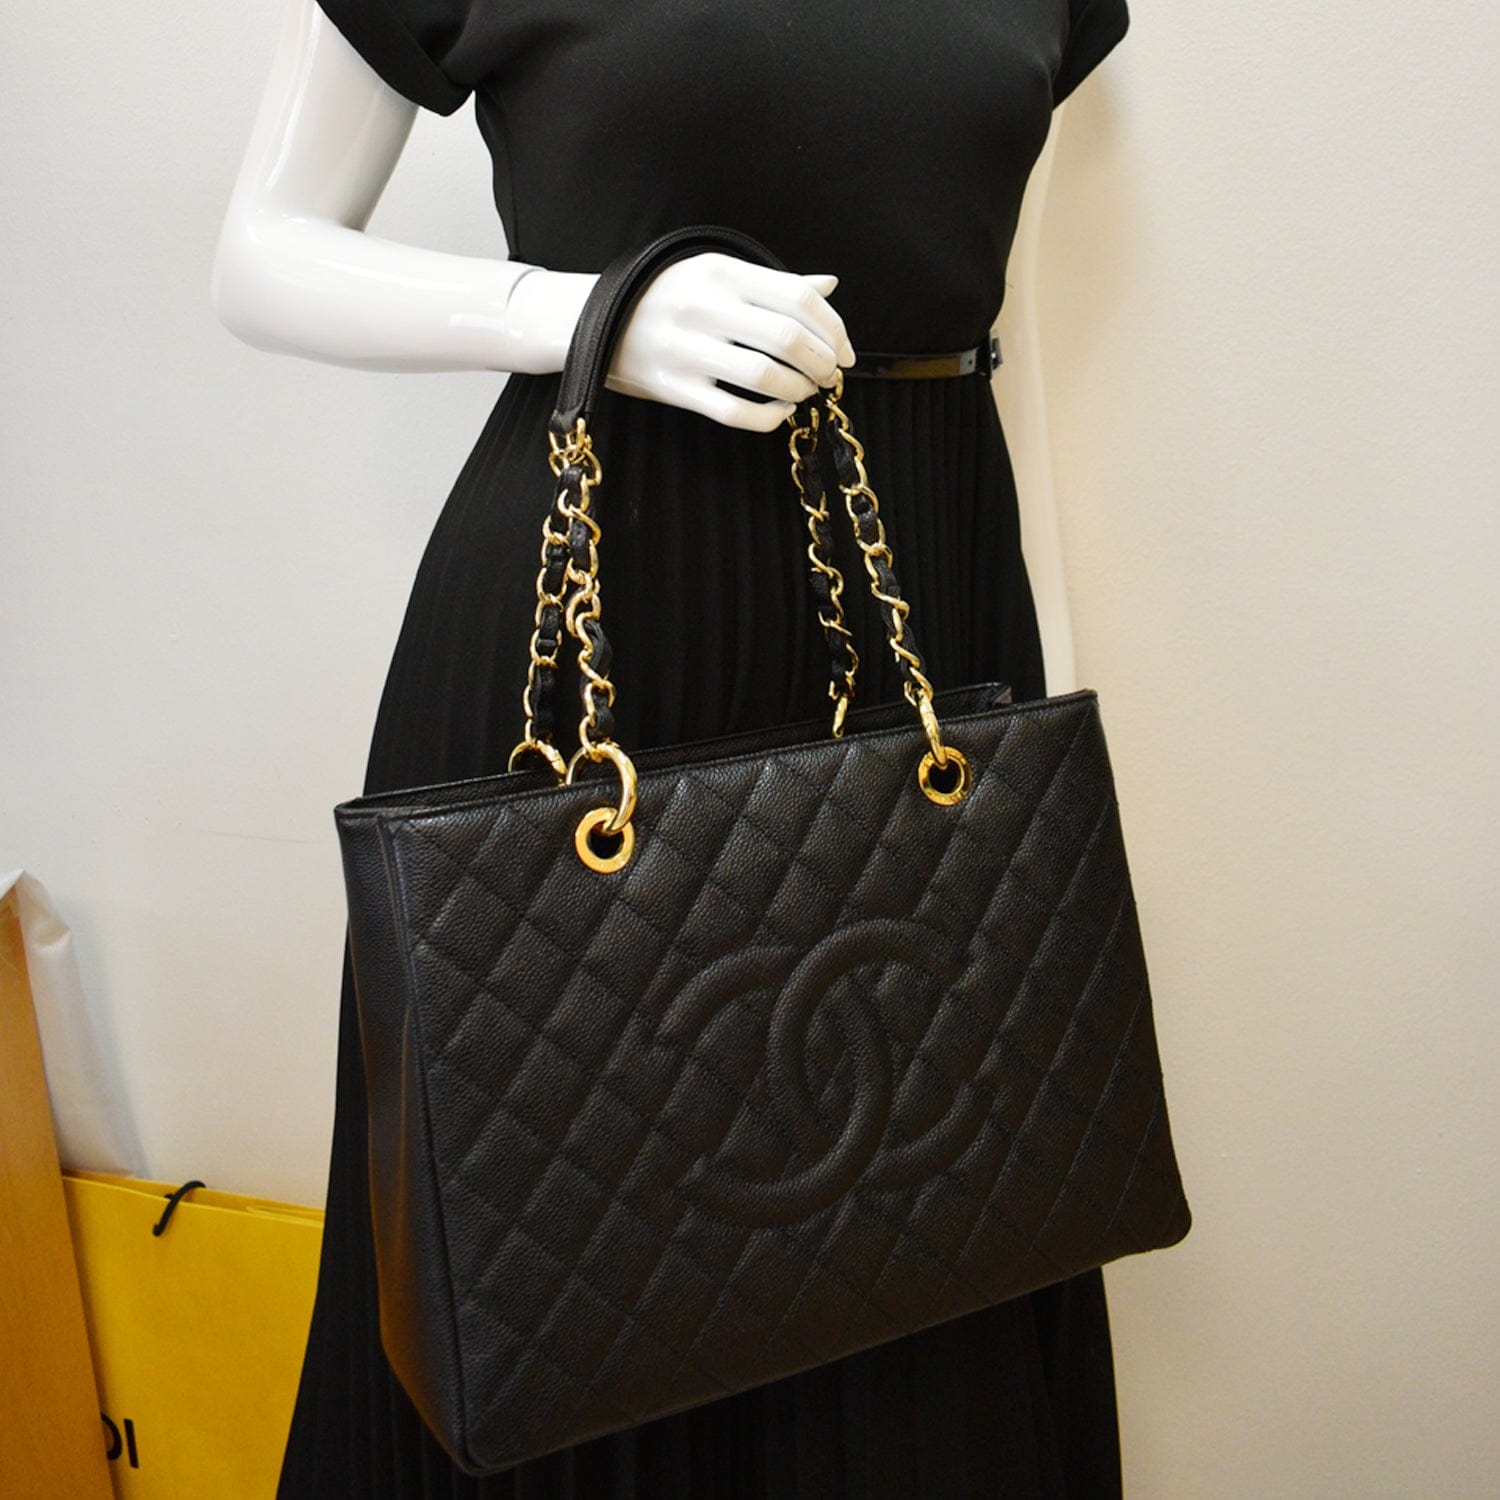 Chanel GST in black caviar leather with silver hardware  Chanel gst, Louis  vuitton bag neverfull, Favorite handbags